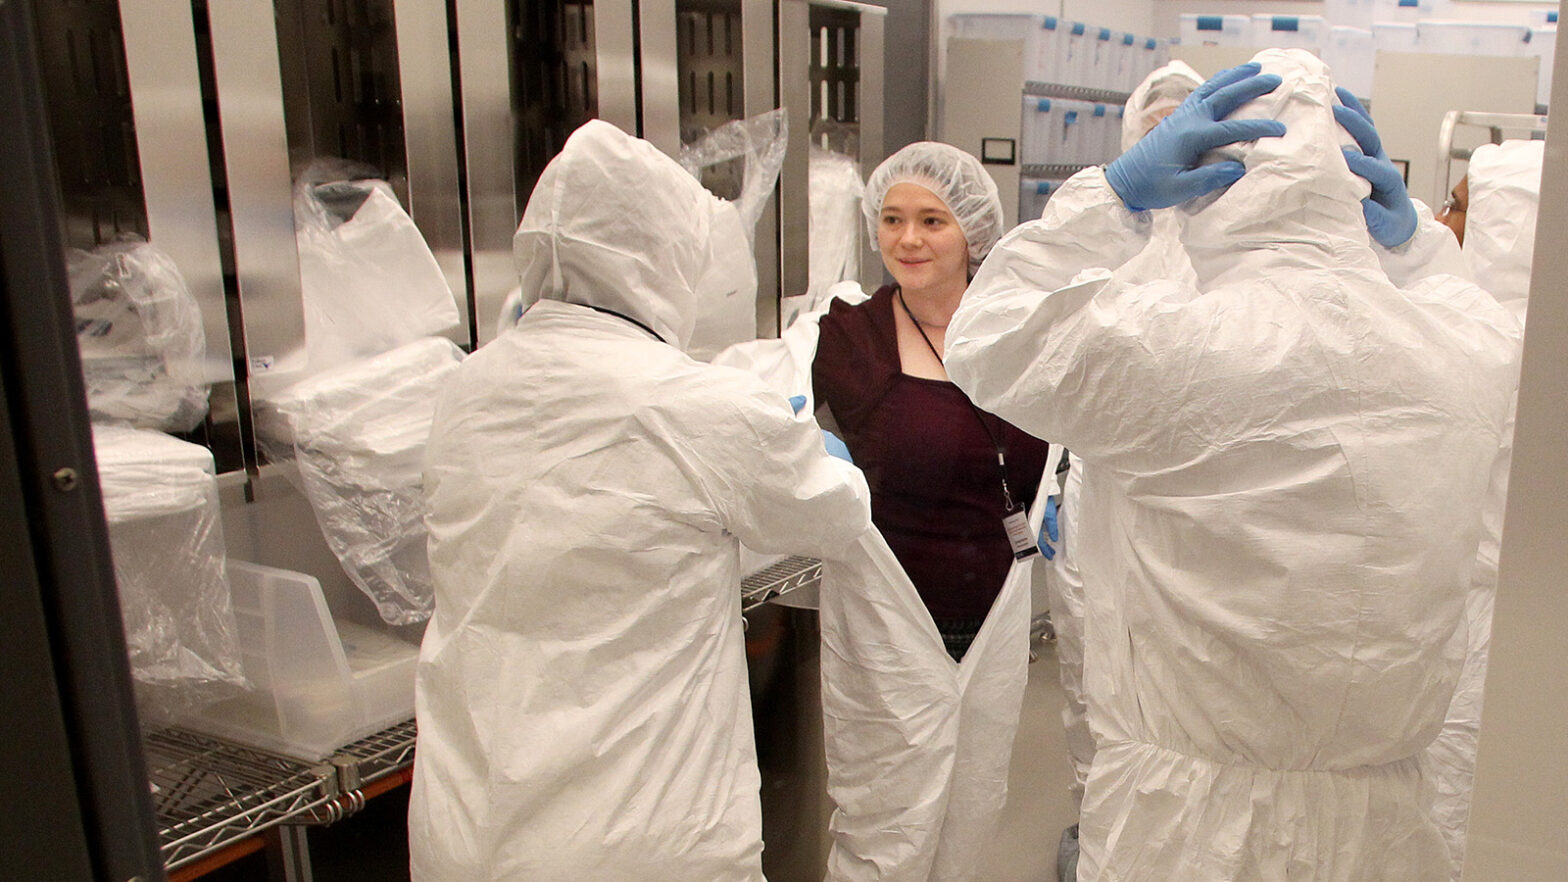 Researchers put on white suits in preparation for entering "clean room" lab